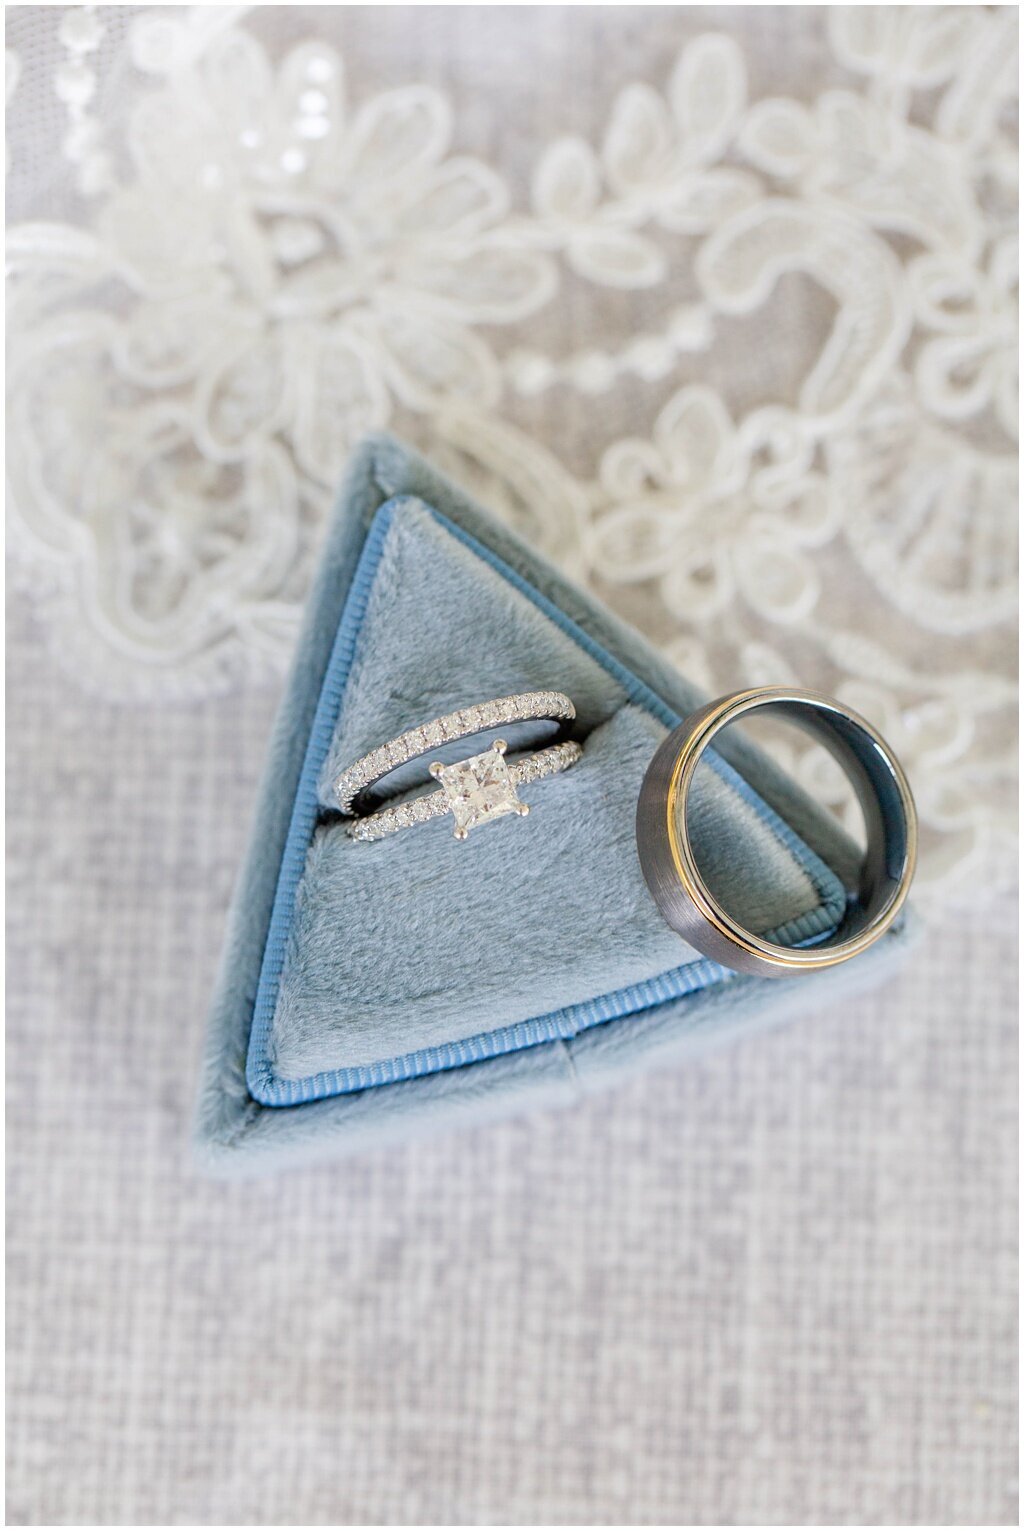 engagements rings in blue triangle ring box laying on veil